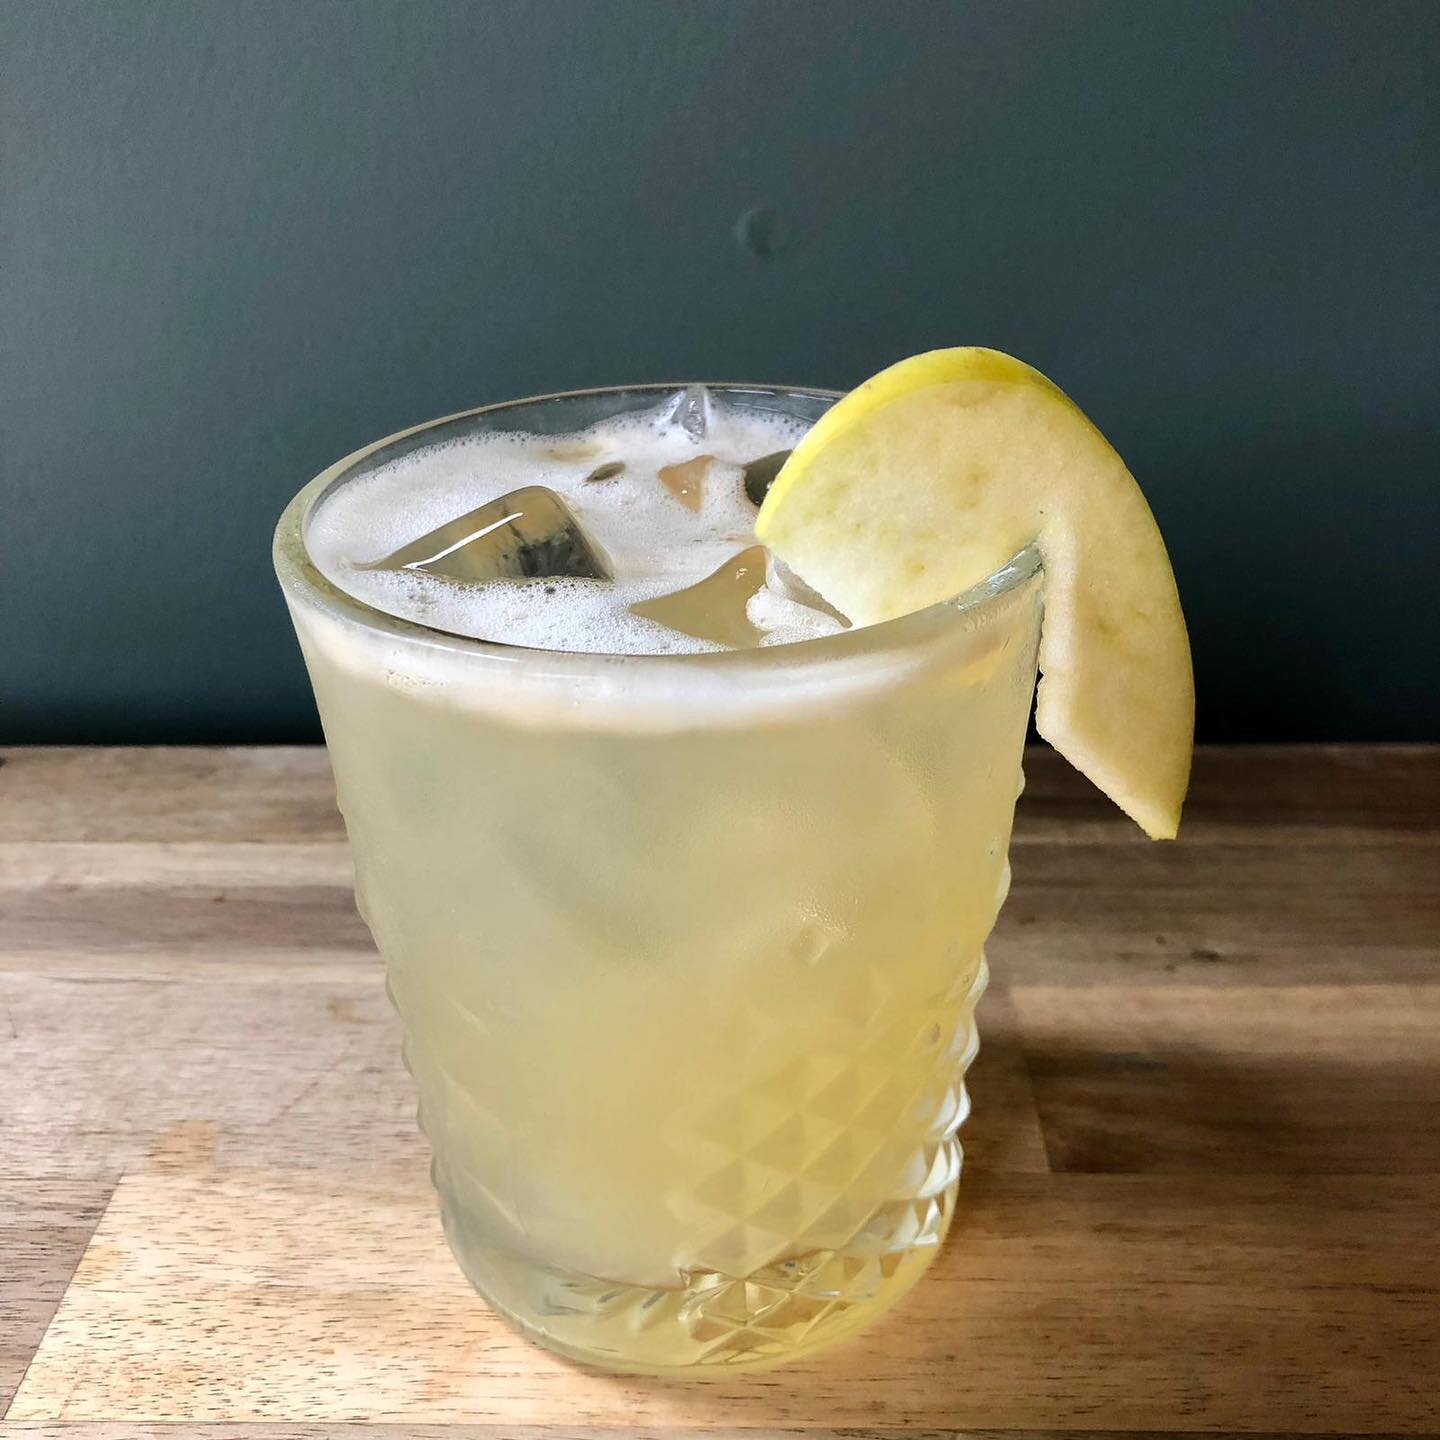 Cocktail Special: &ldquo;No Trace of Summer&rdquo;

While the weather is making its&rsquo; mind up it&rsquo;s business as usual for our bar team. 

Going down a treat this weekend is this little beauty:
Buffalo Trace, St Germain, lemon juice and appl